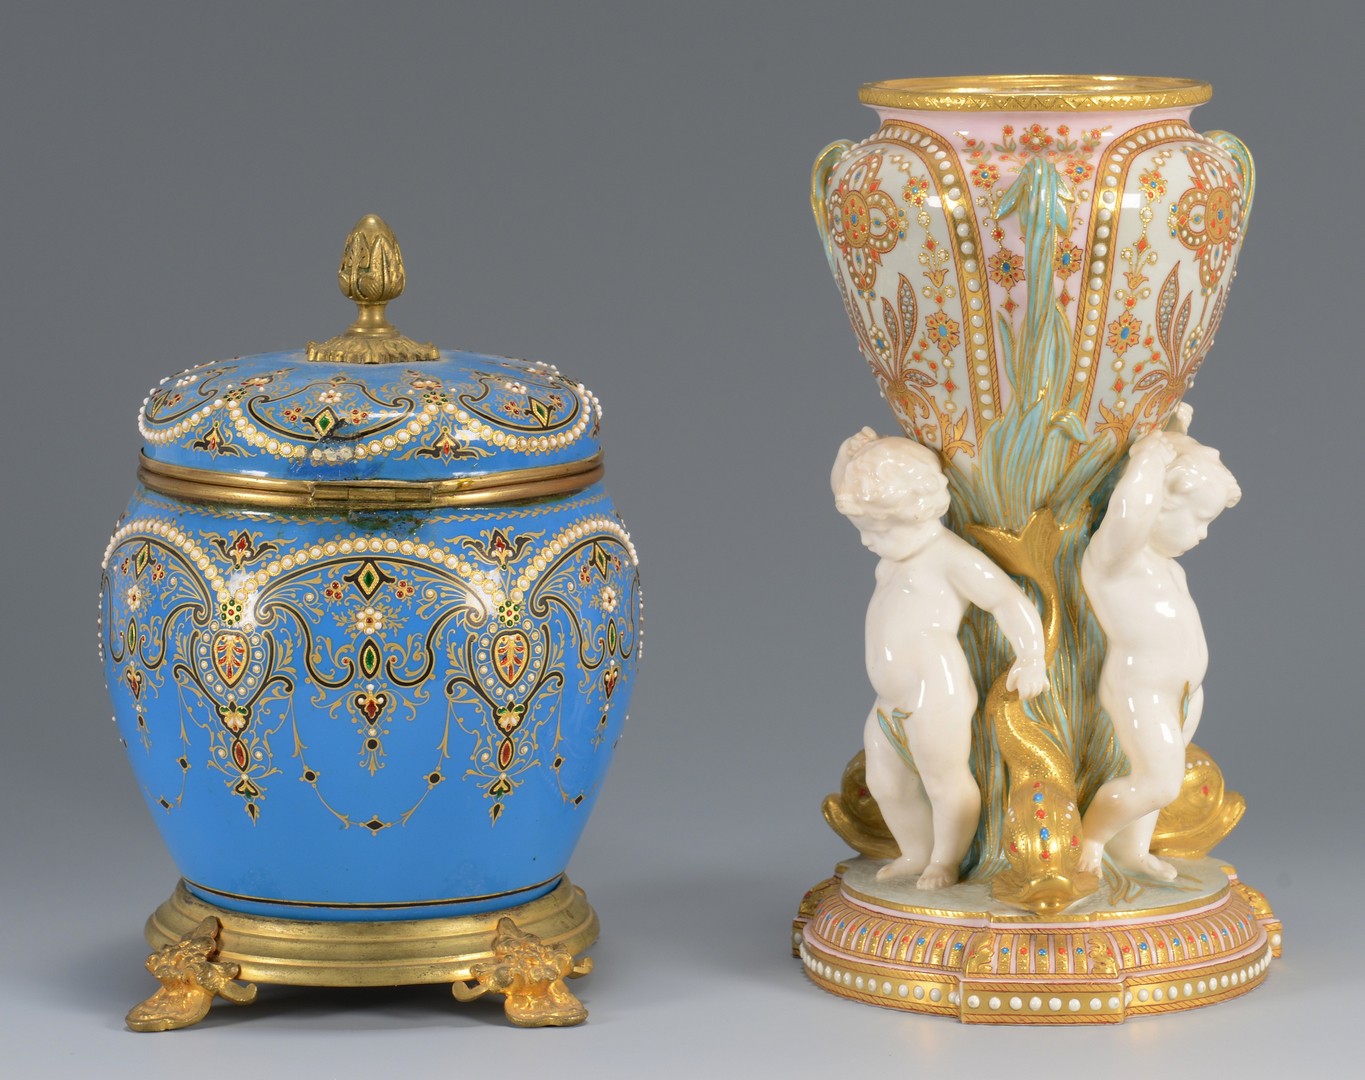 Lot 613: European jeweled porcelain and glass vase and jar